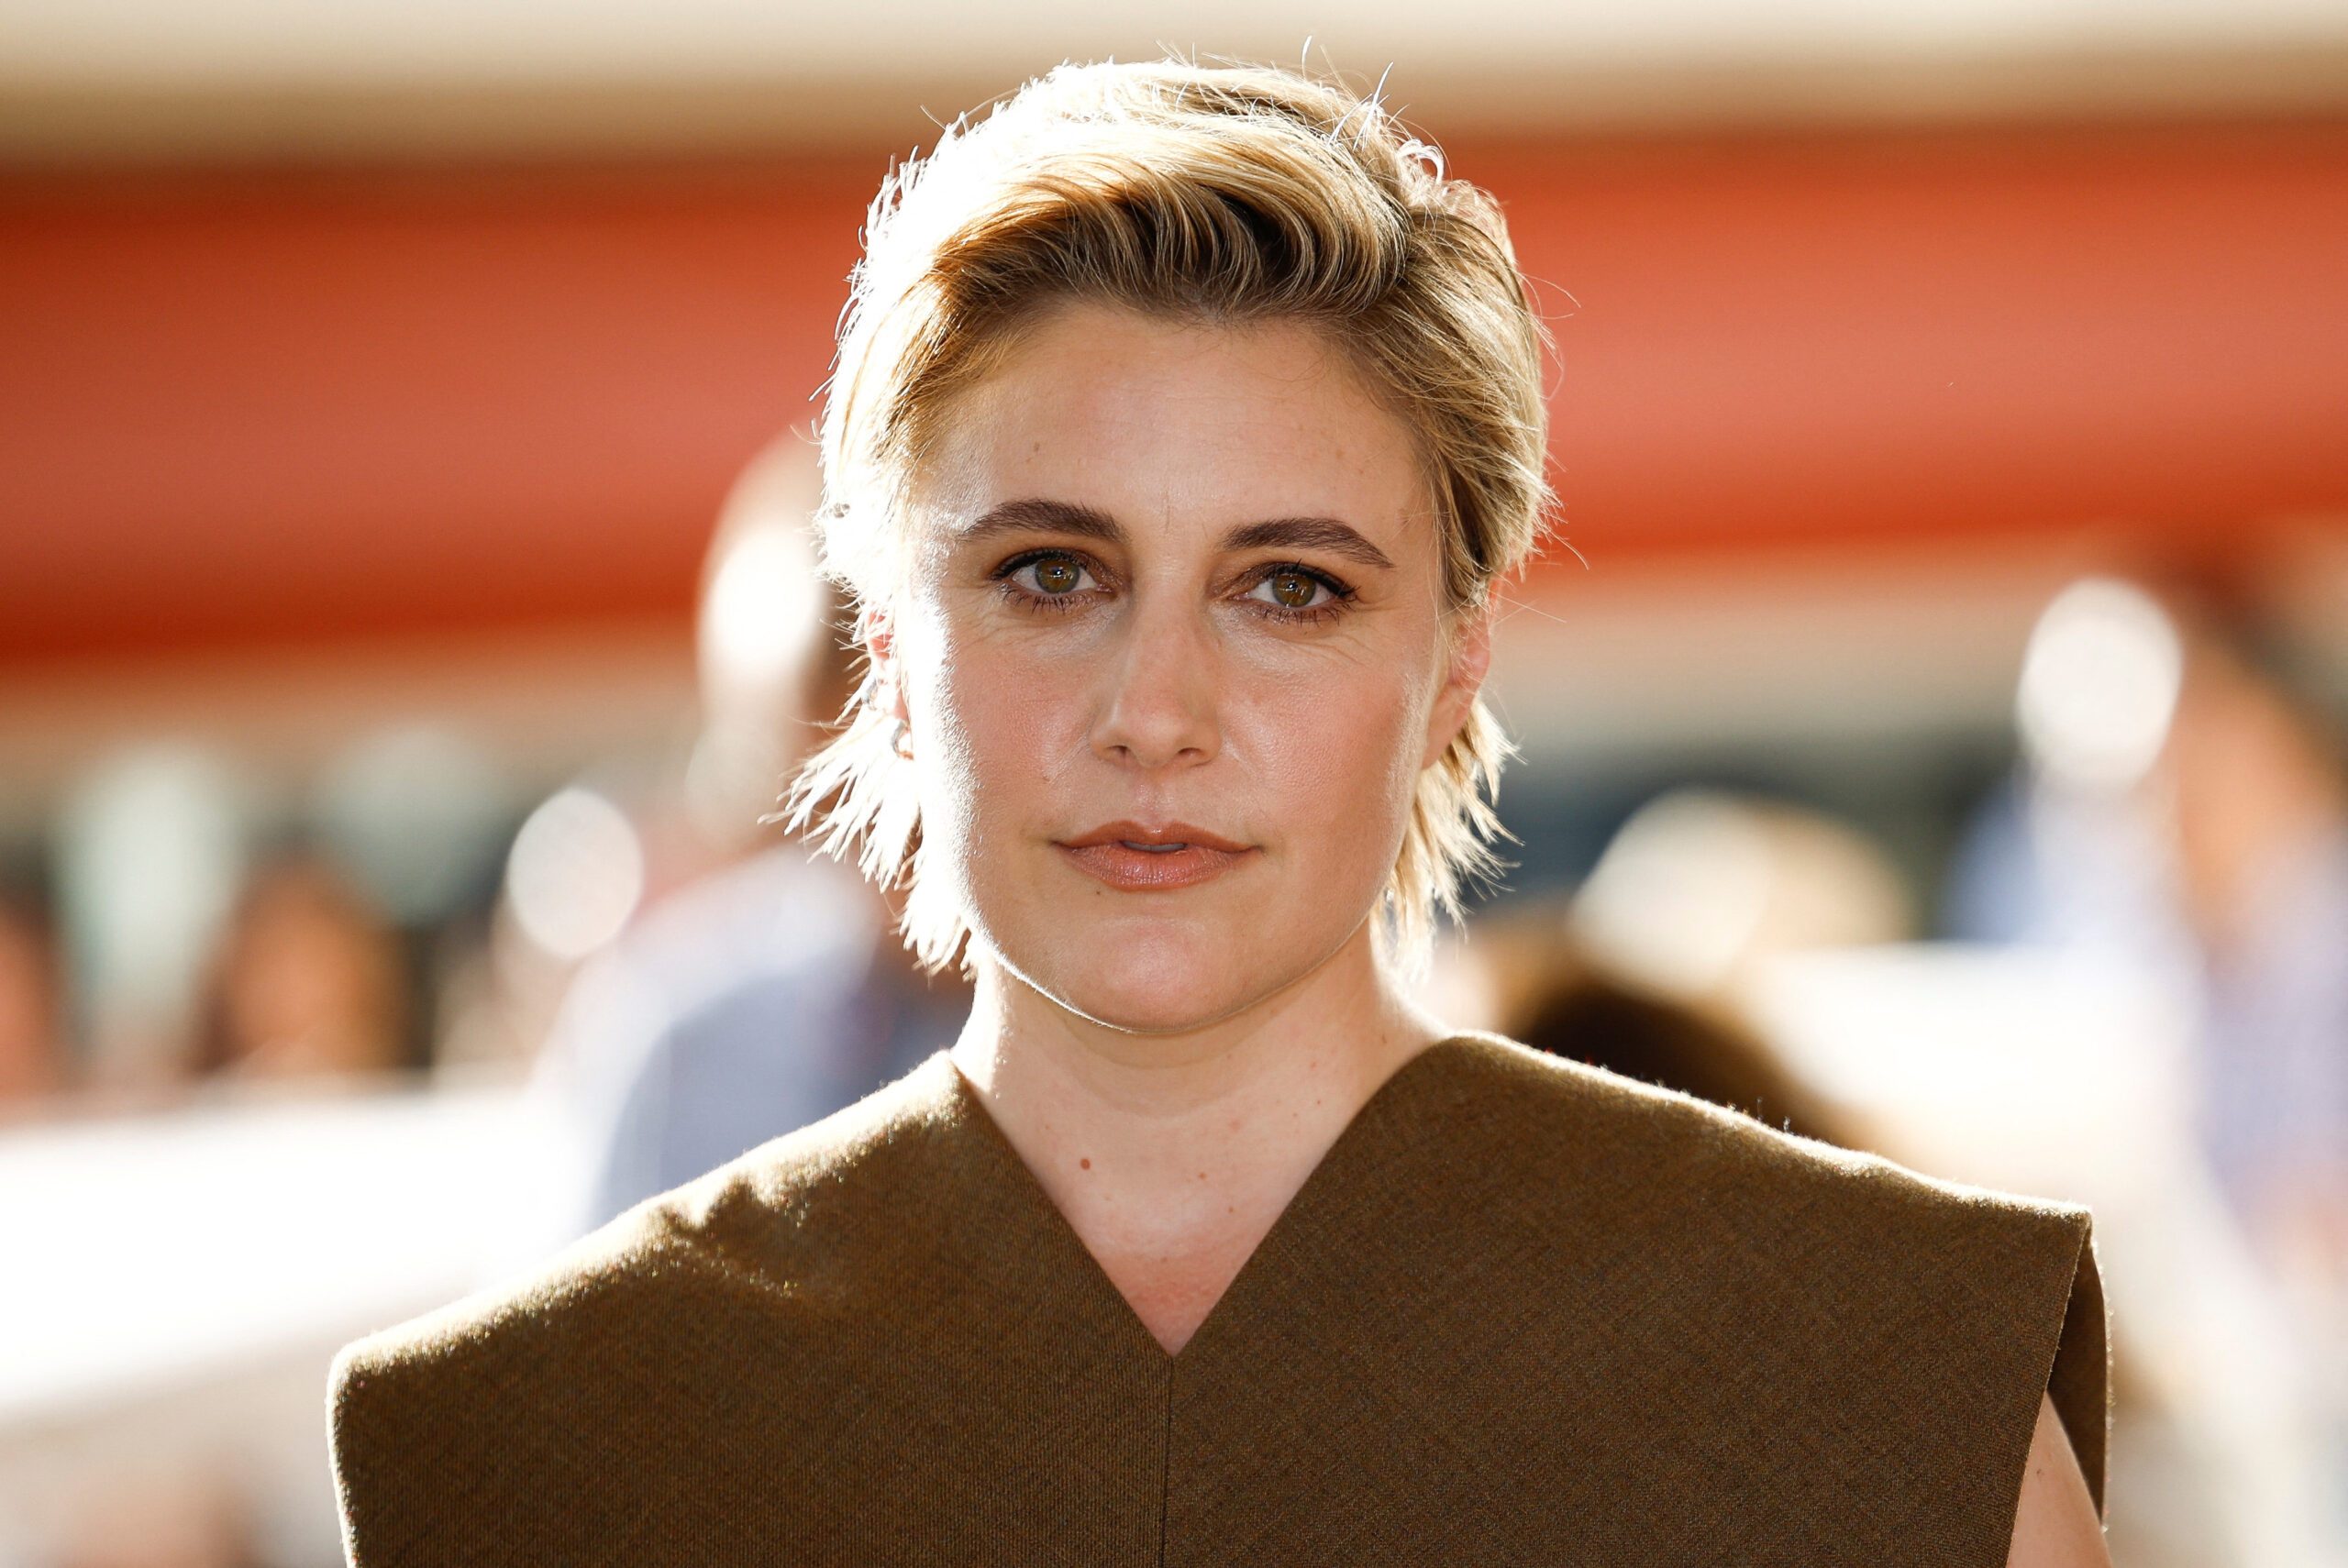 Greta Gerwig at Cannes: #MeToo has changed things for the better